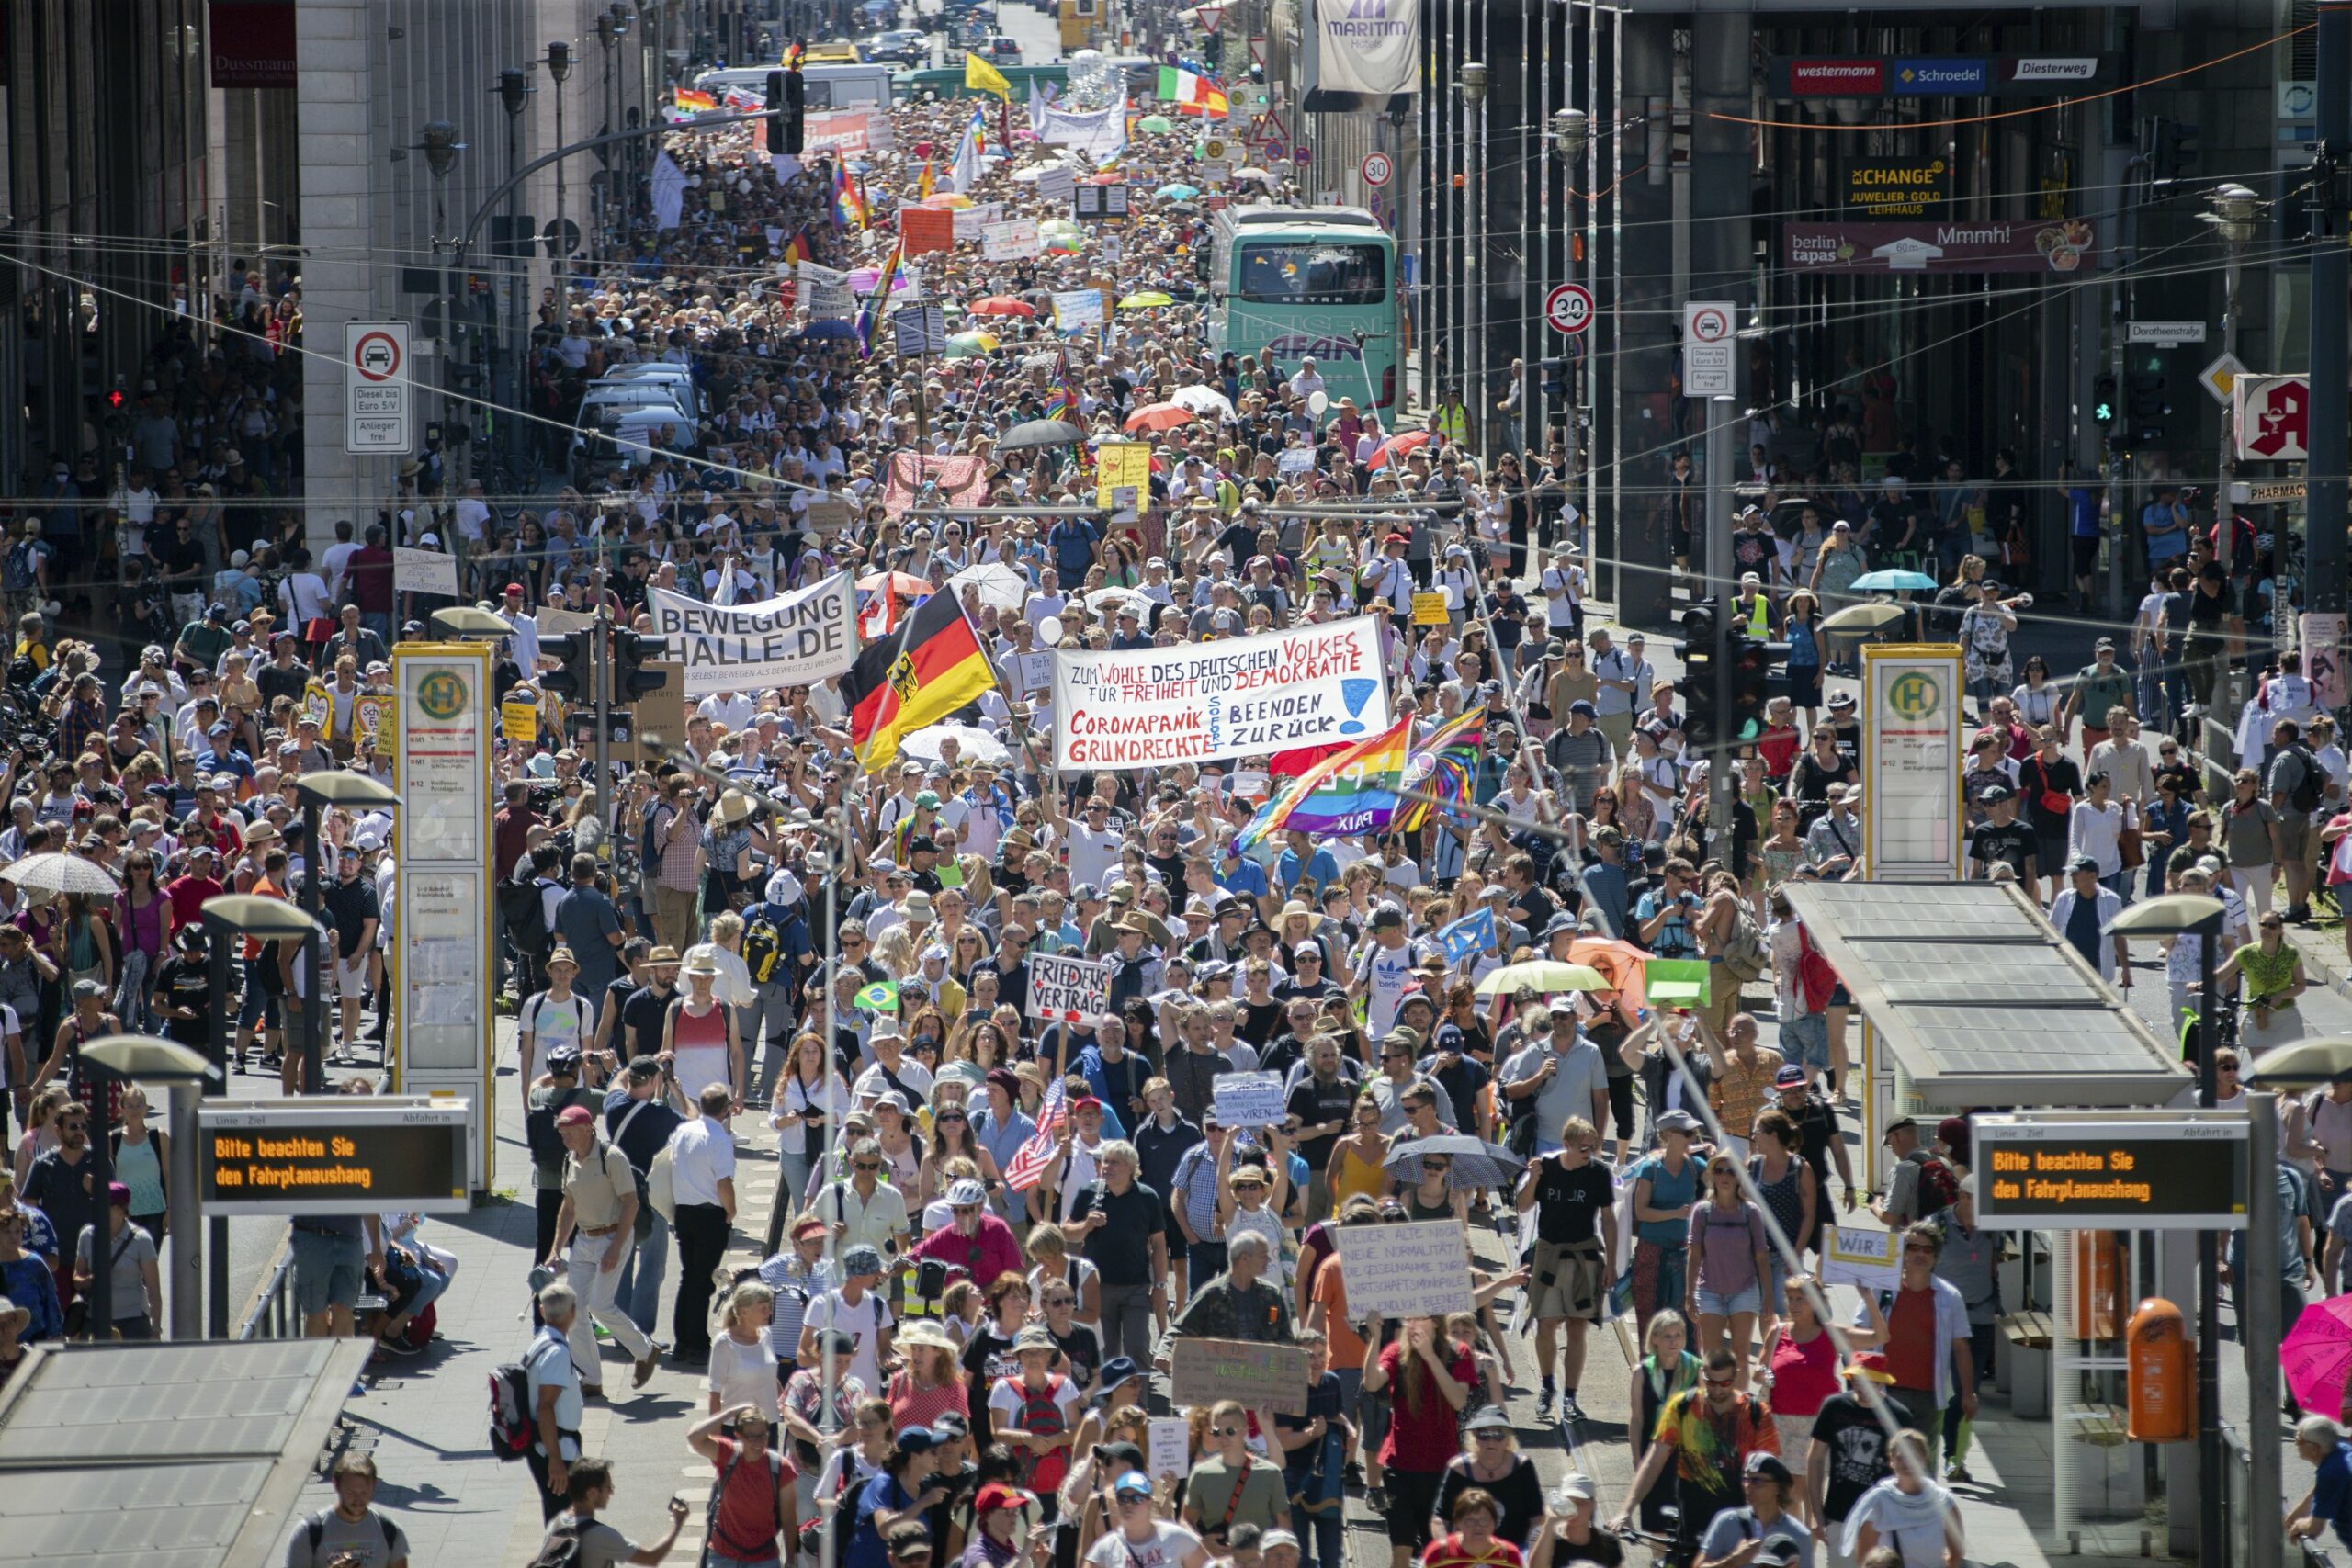 Thousands protest in Berlin against coronavirus restrictions